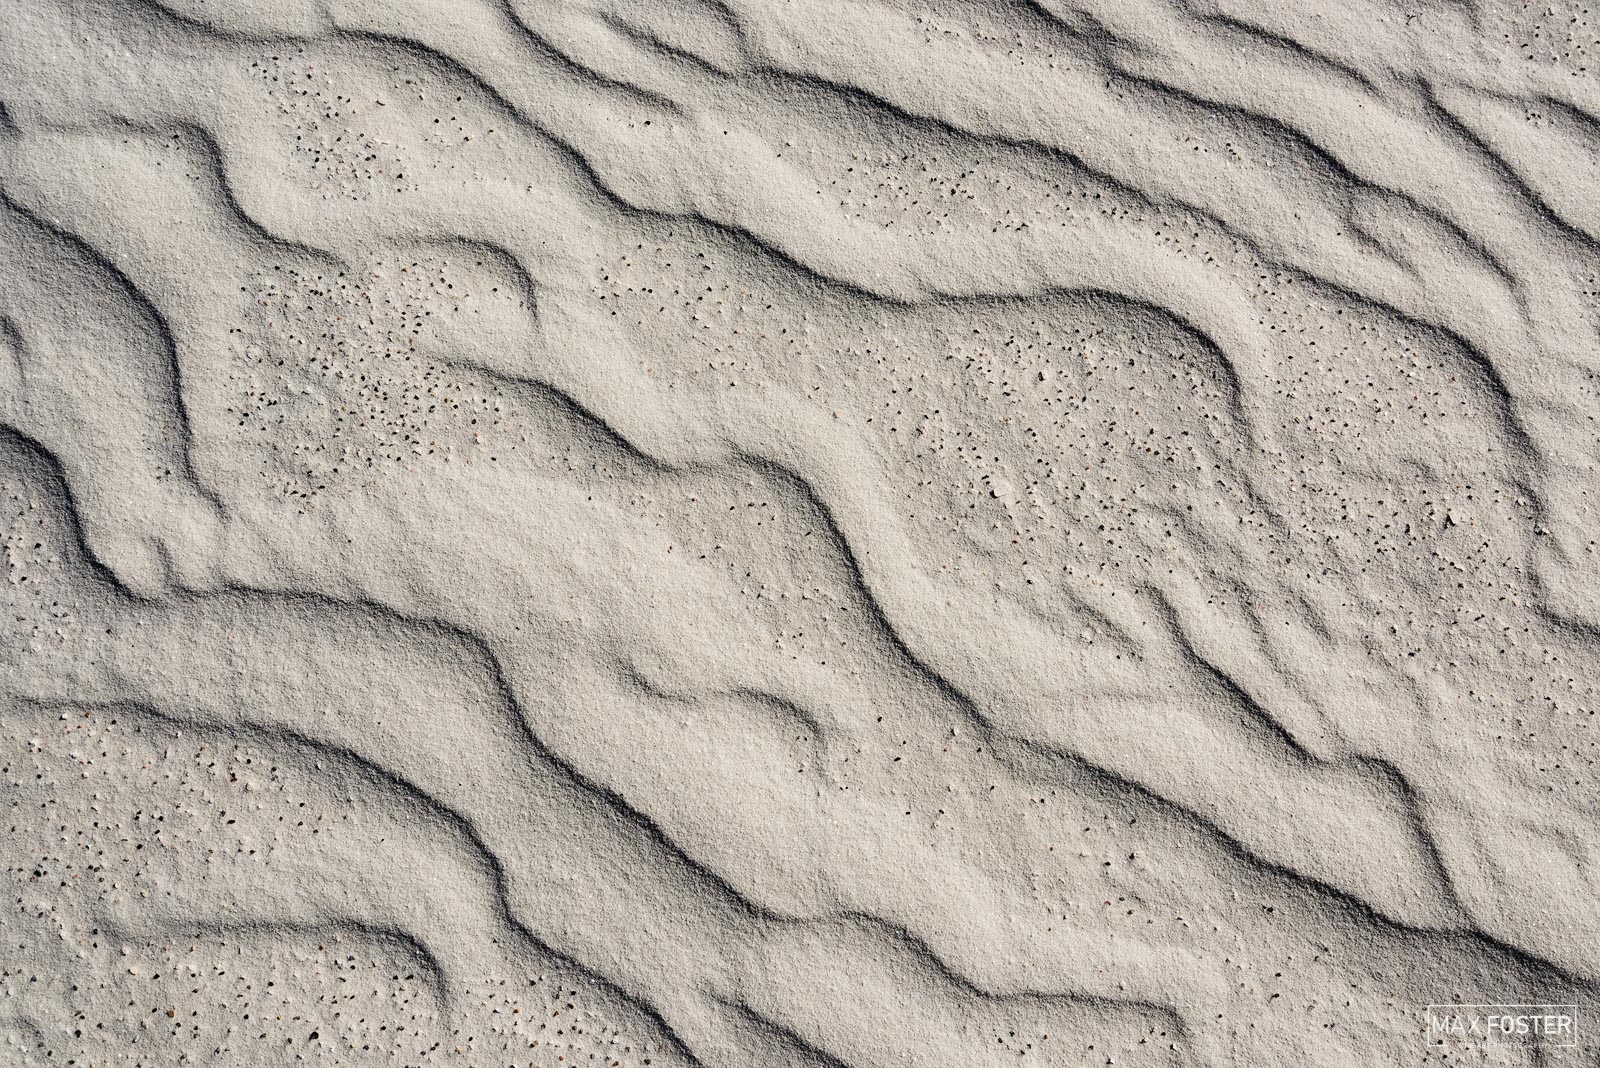 Bring nature into your home with Sands Of Time, Max Foster's limited edition photography print of sand patterns at White Sands...